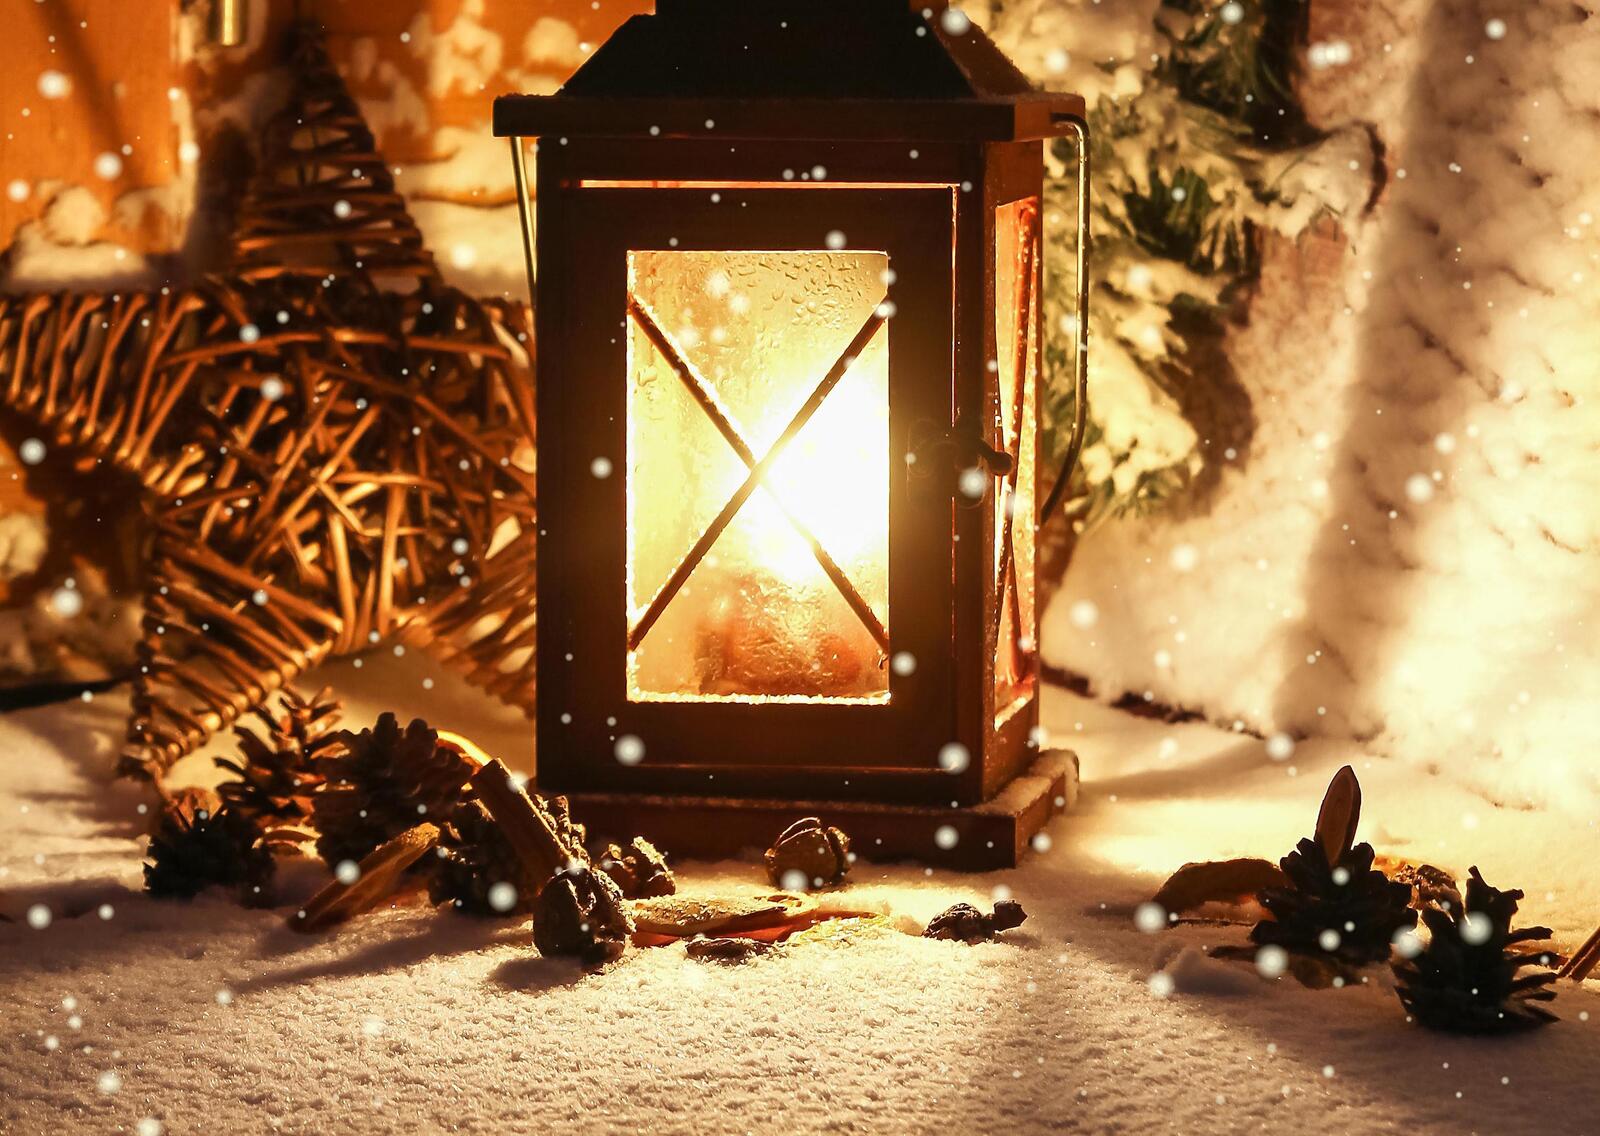 Wallpapers winter flashlight candle on the desktop